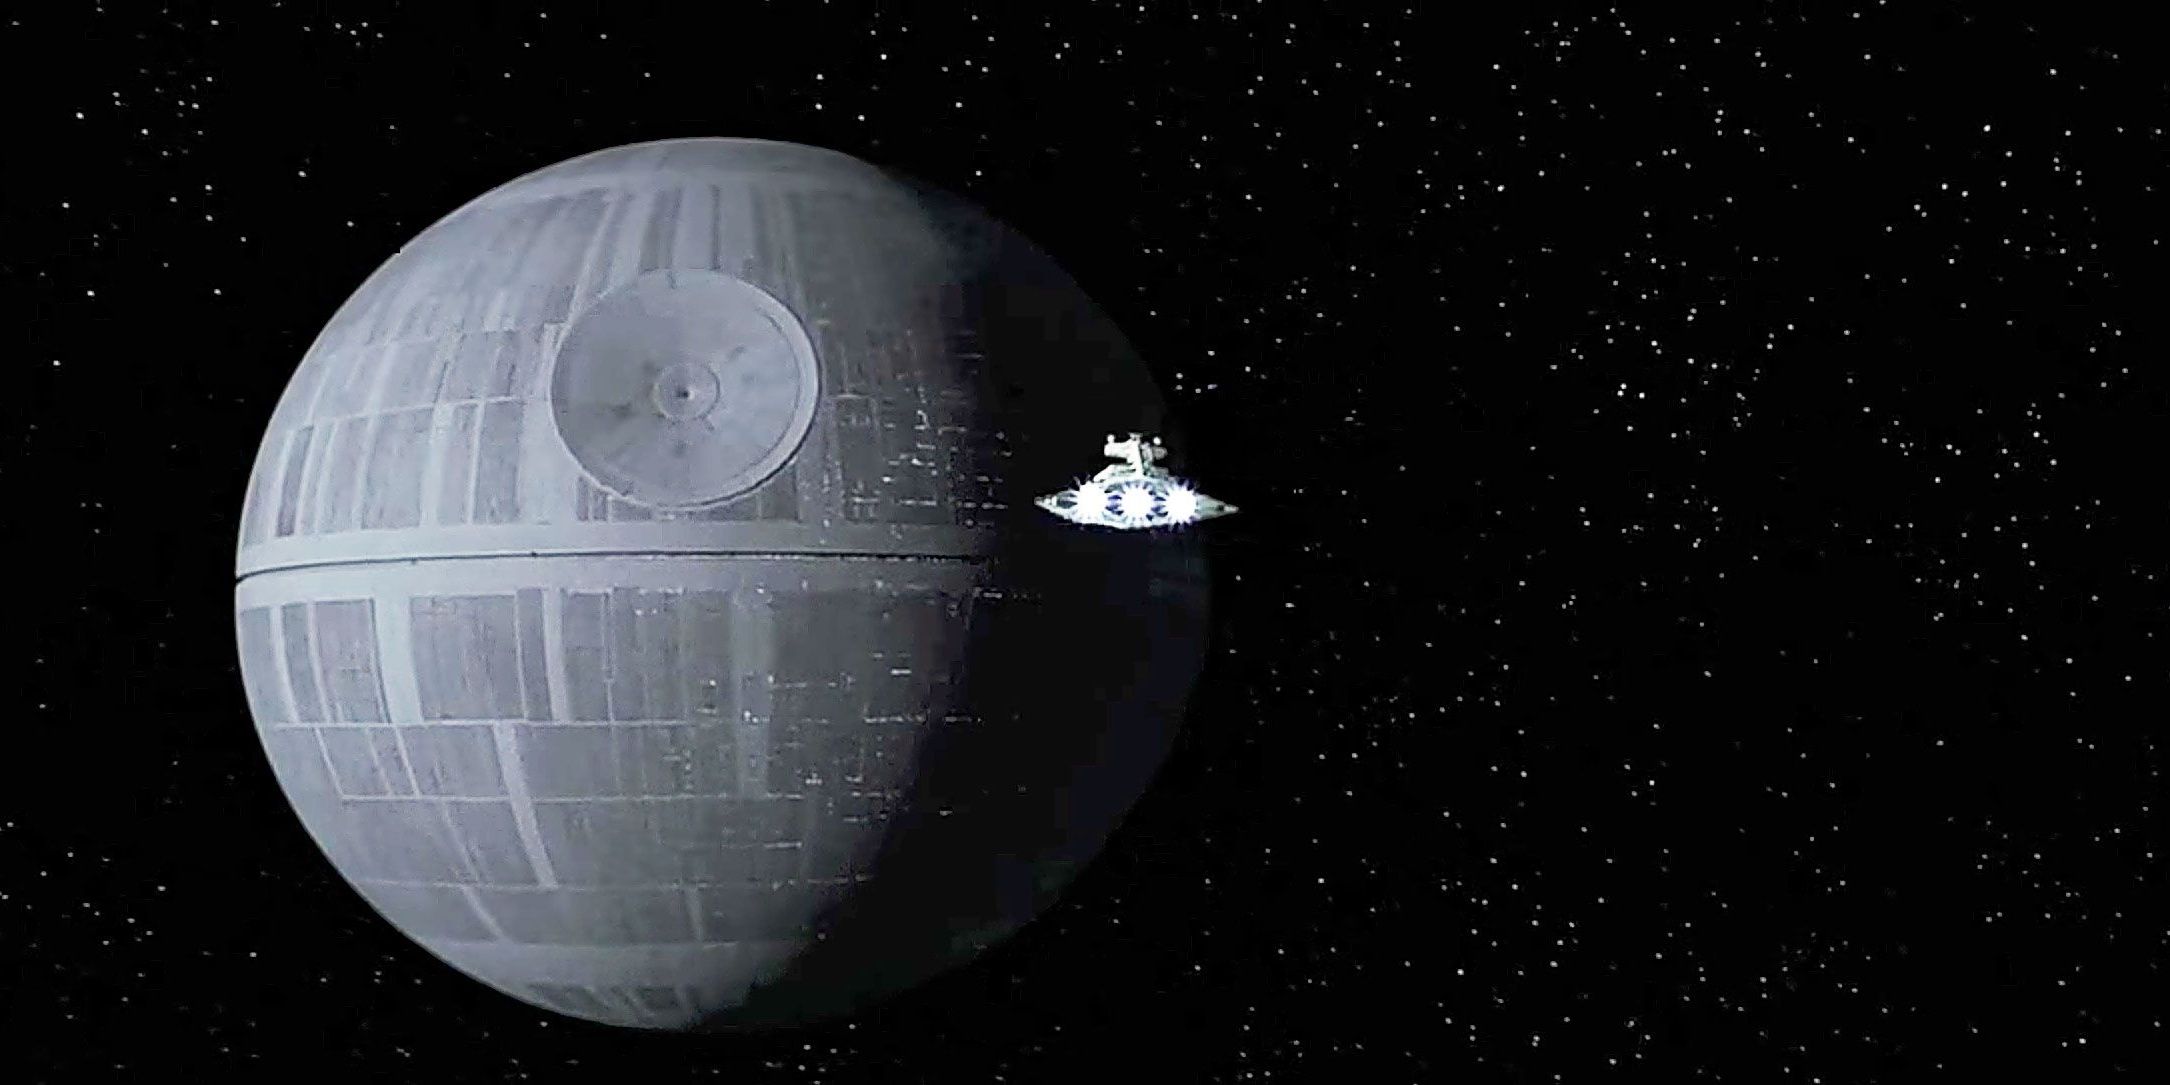 The Death Star in space approaches a small ship